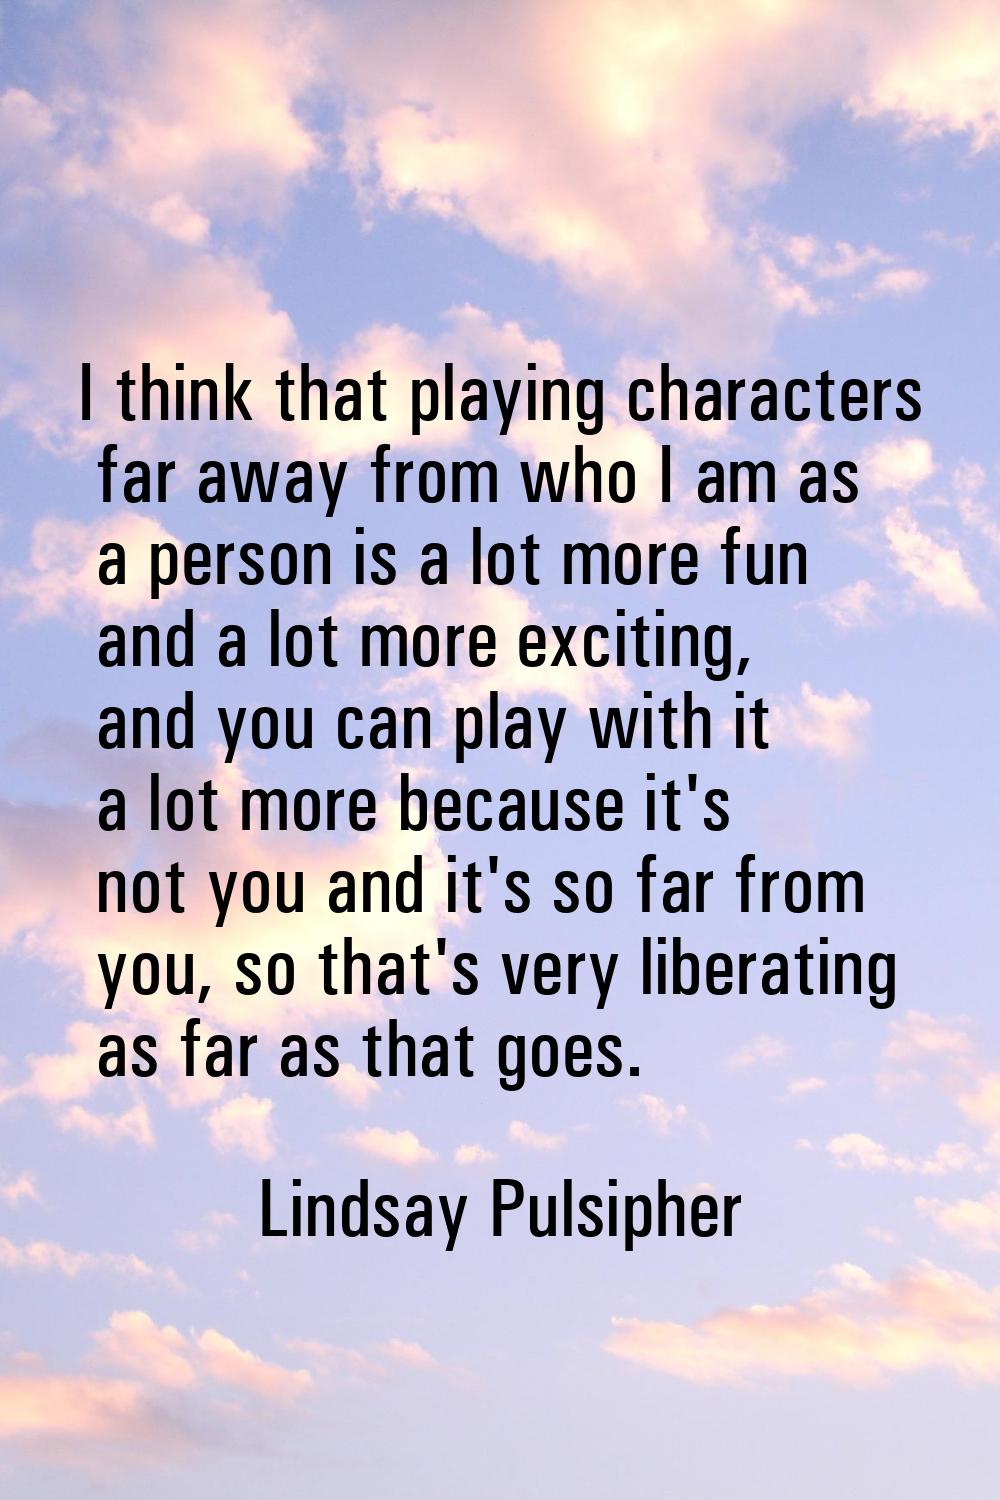 I think that playing characters far away from who I am as a person is a lot more fun and a lot more